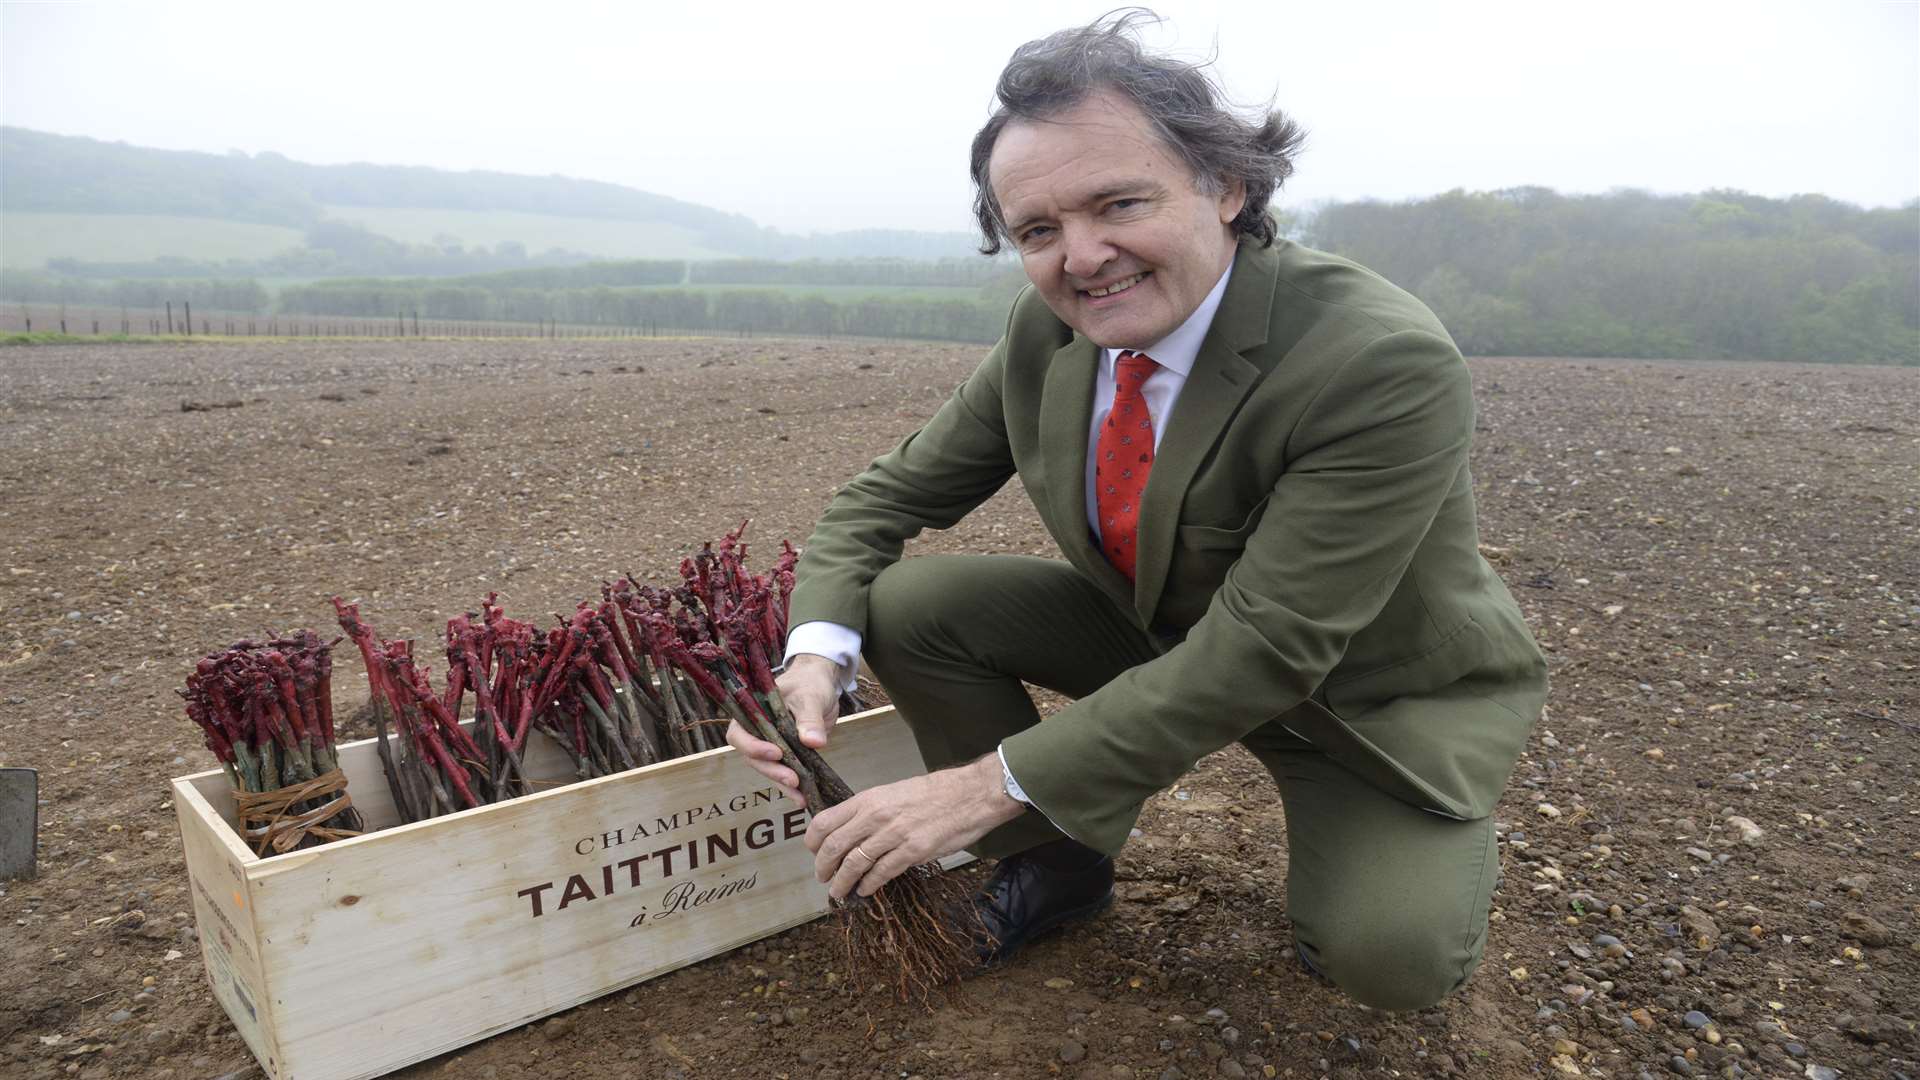 Pierre-Emmanuel Taittinger ready to plant the first vines at Domaine Evremond in Chilham